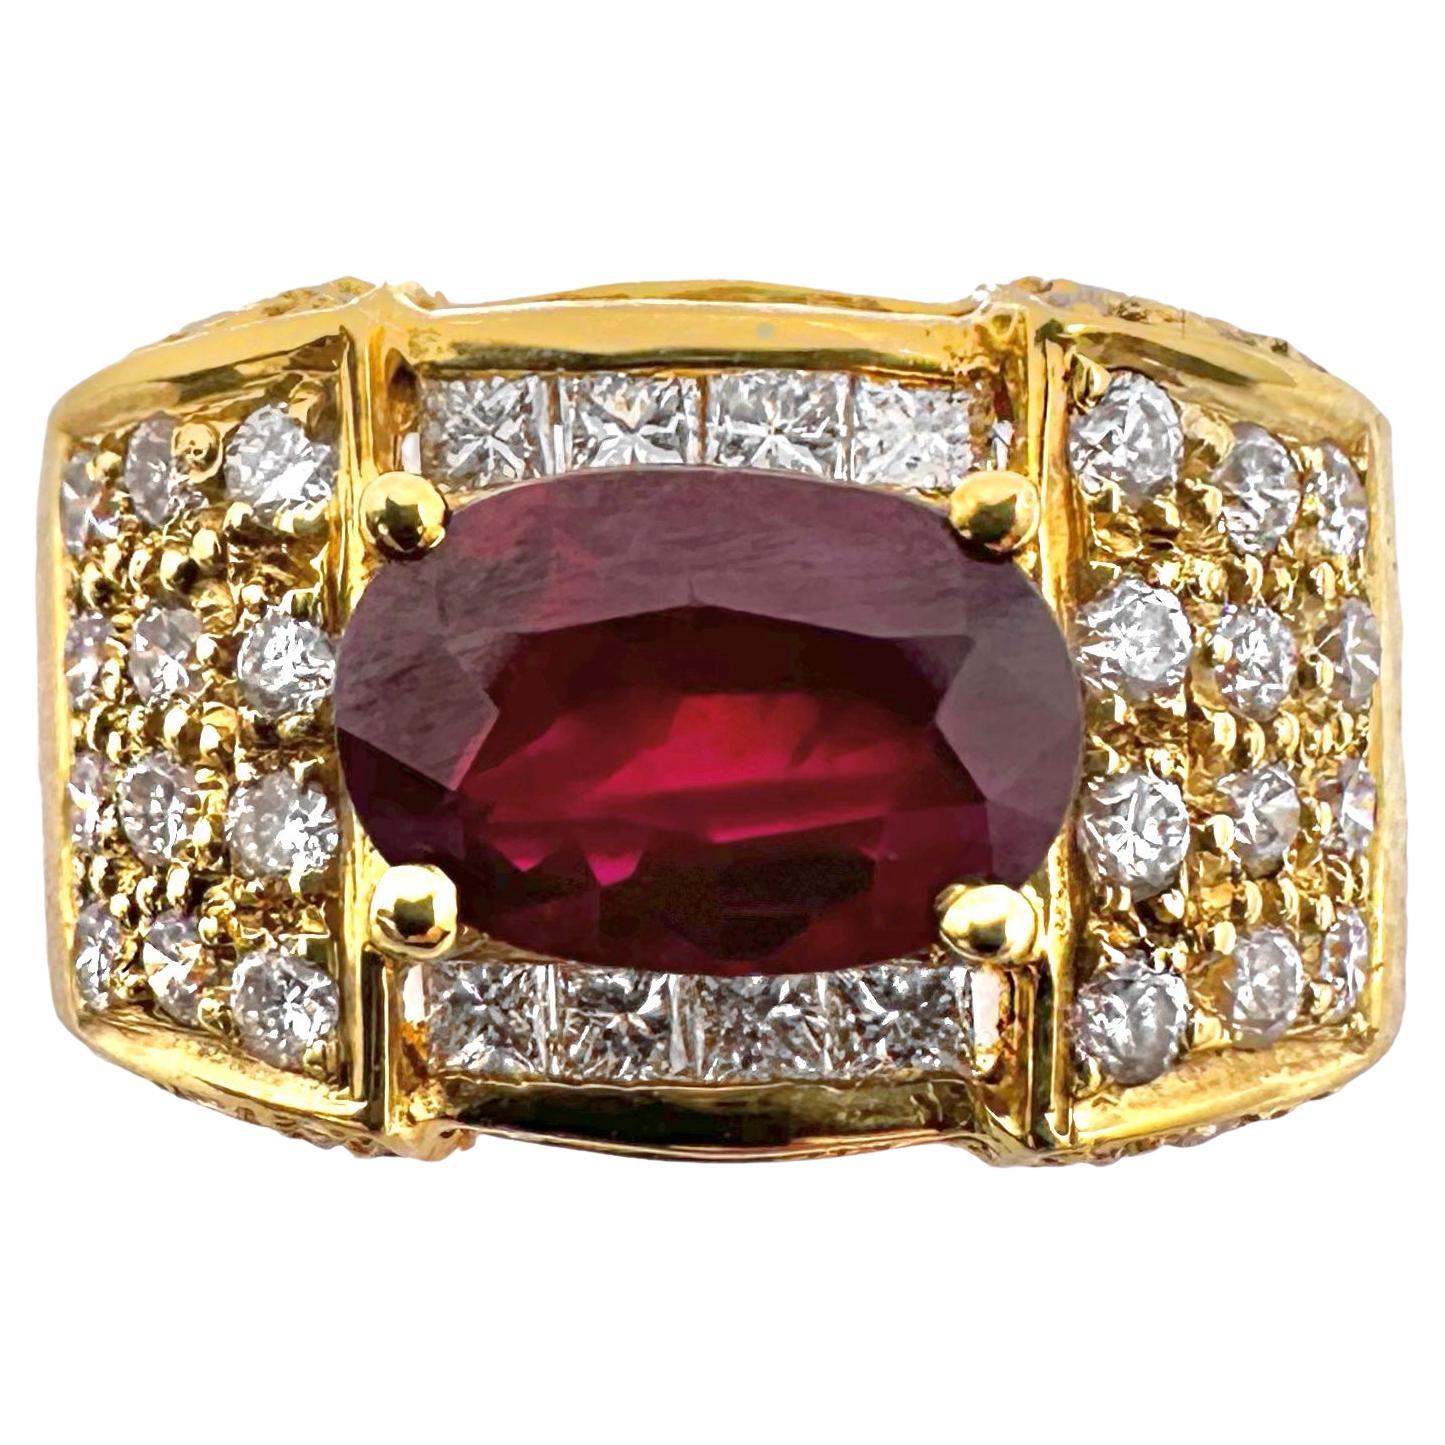 Late-20th Century Tailored 18k Yellow Gold, Ruby and Diamond Cocktail Ring